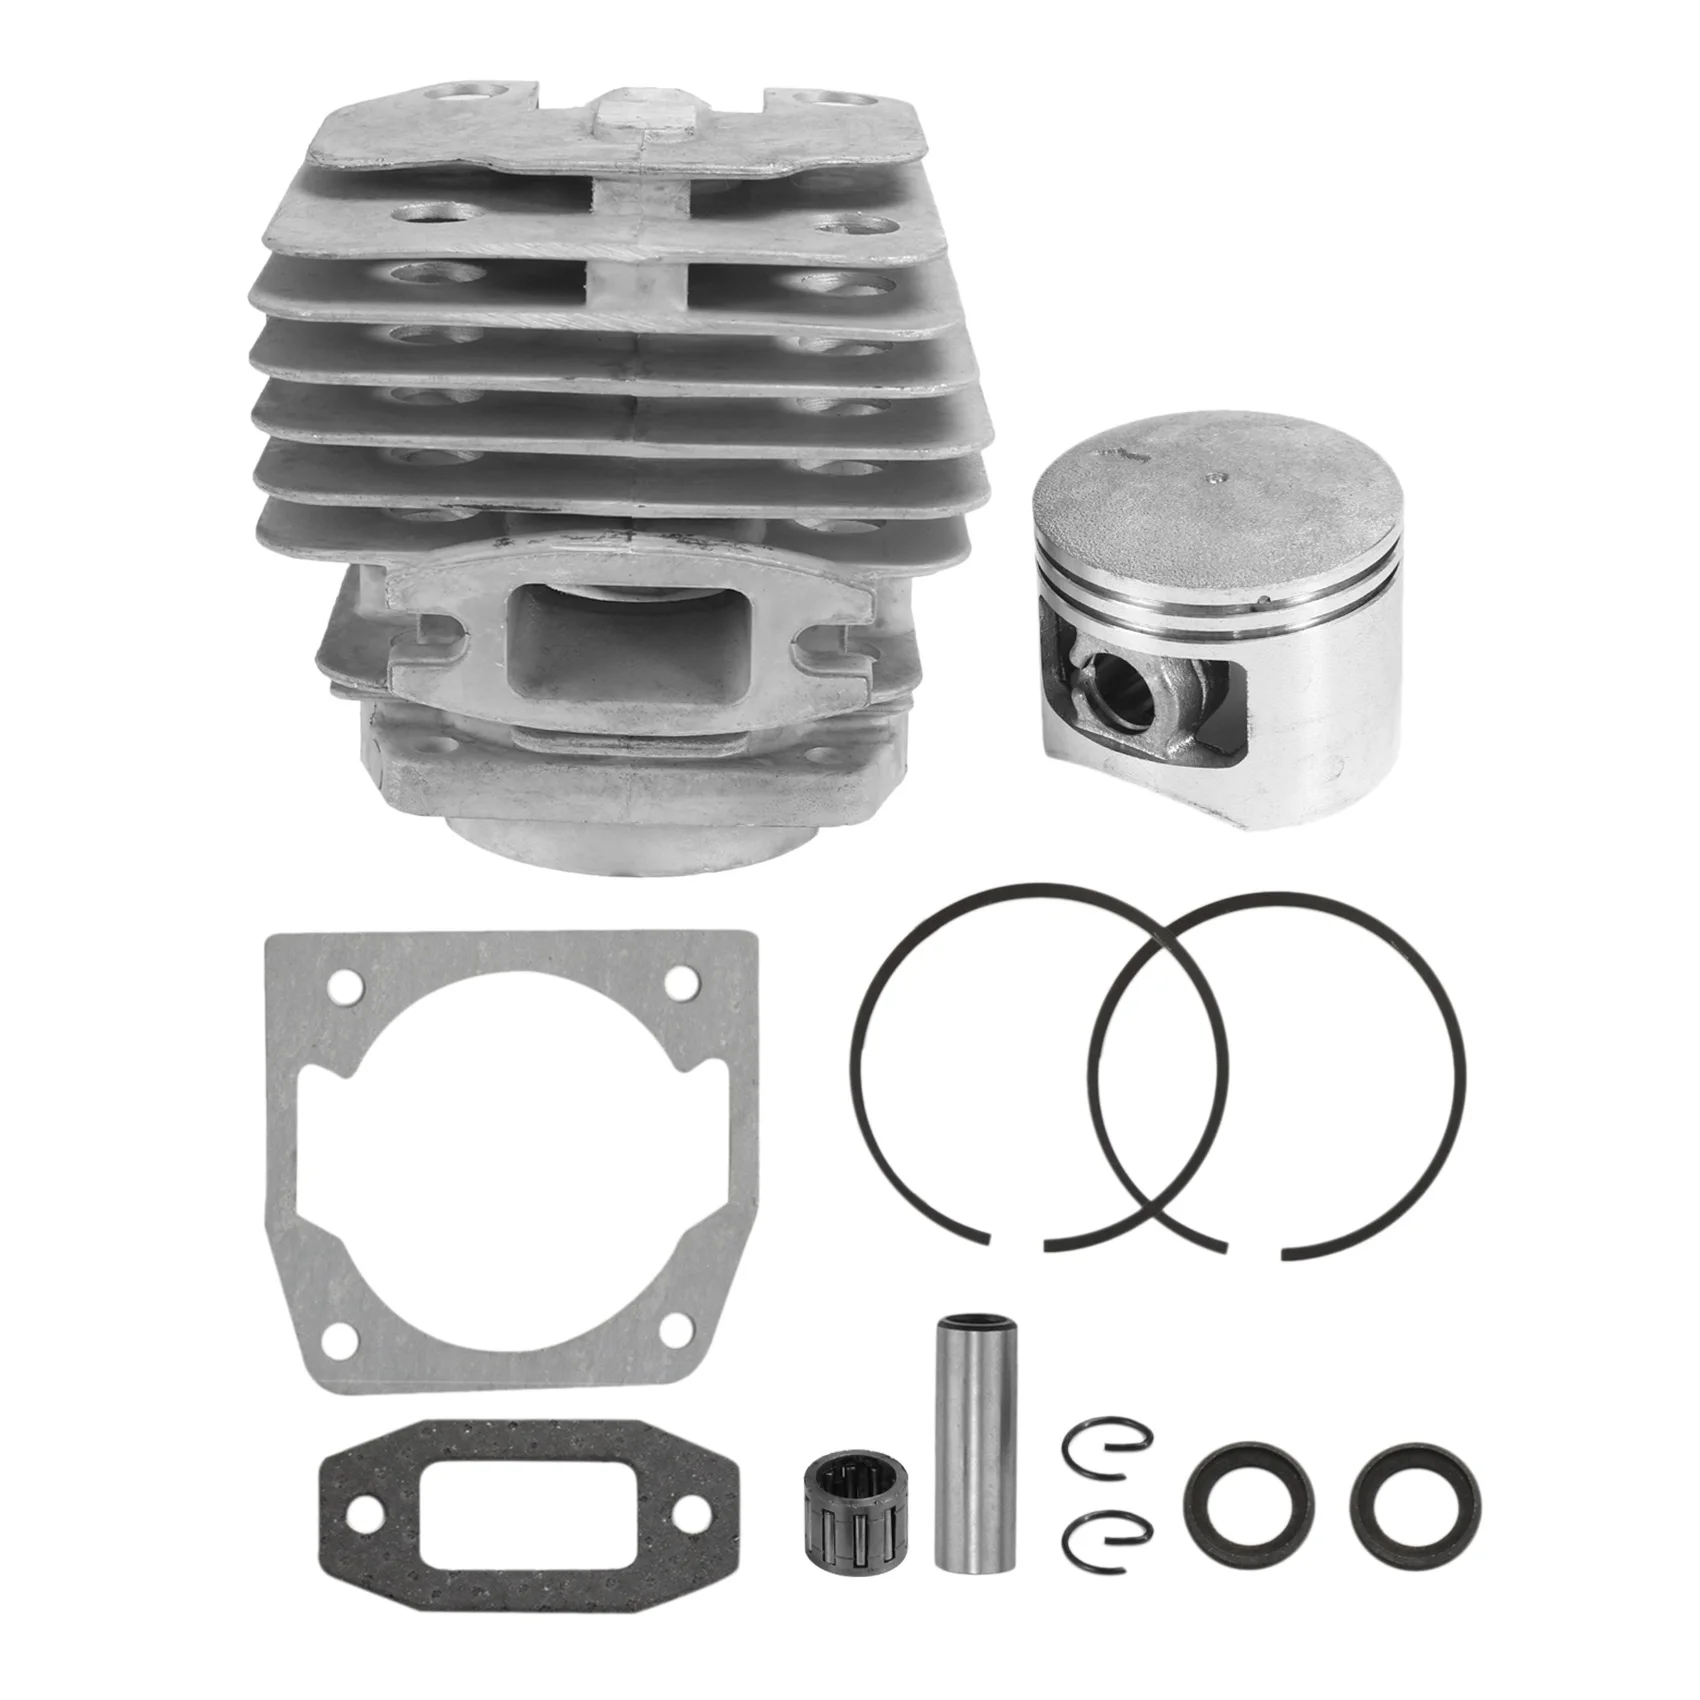 

1 Set Diameter 45mm Chainsaw Cylinder and Piston Set Fit 52 52Cc Chainsaw Spare Parts for Gasoline/Oil Chainsaw Spares